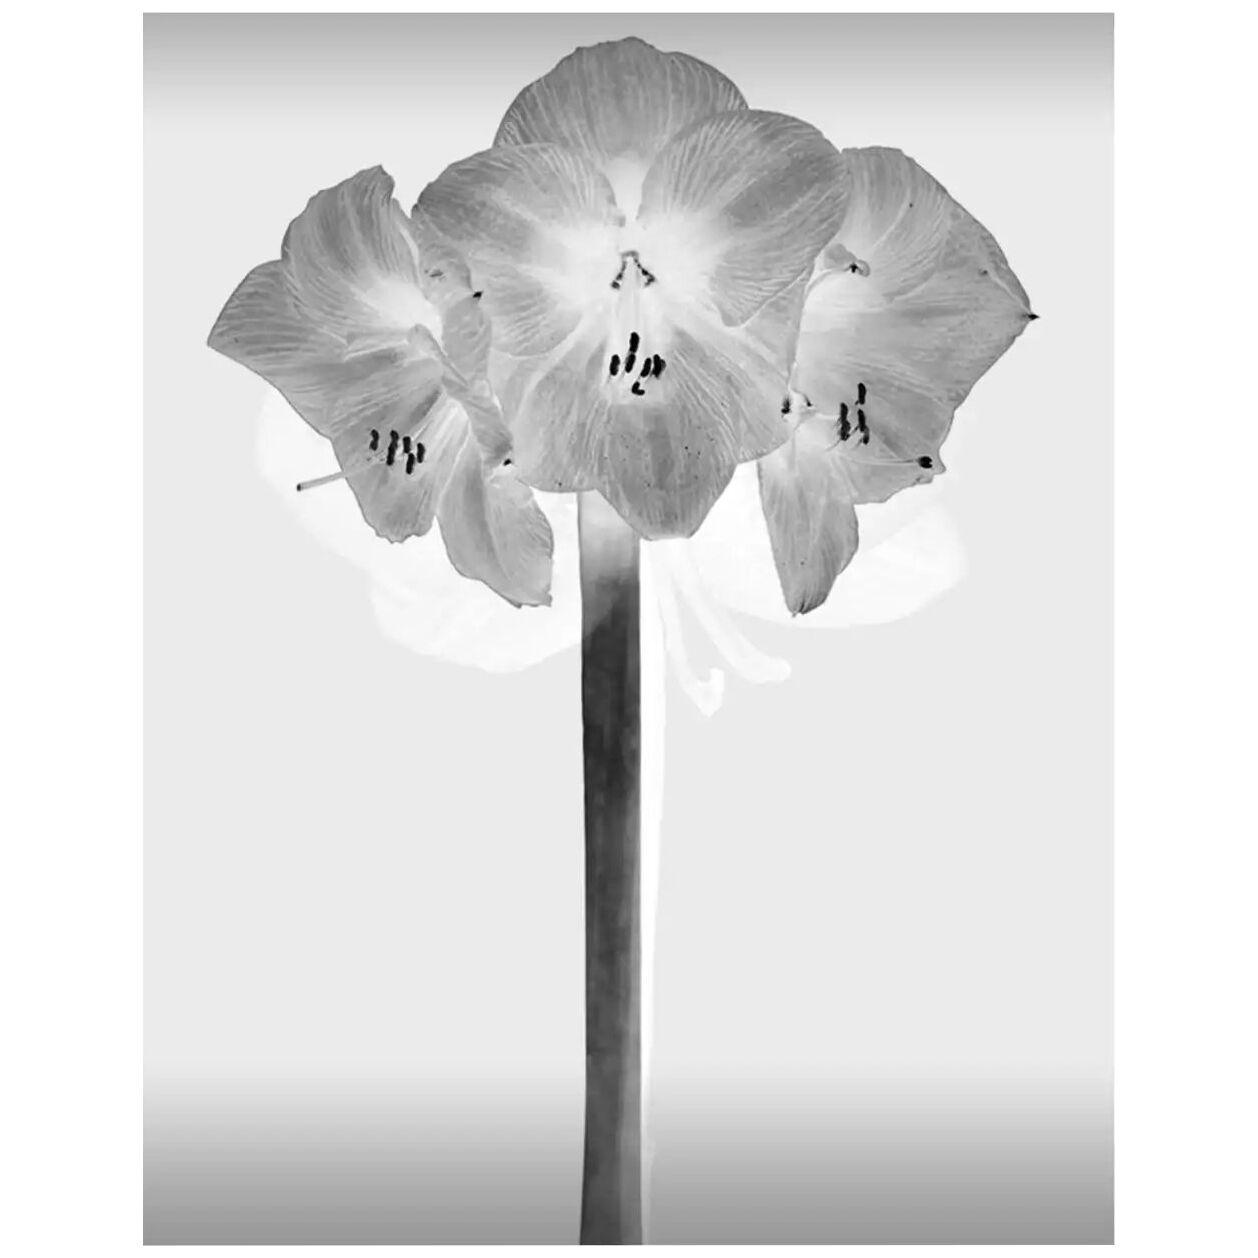 Contemporary Black and White Flowers Photography by Mónica Sánchez-Robles